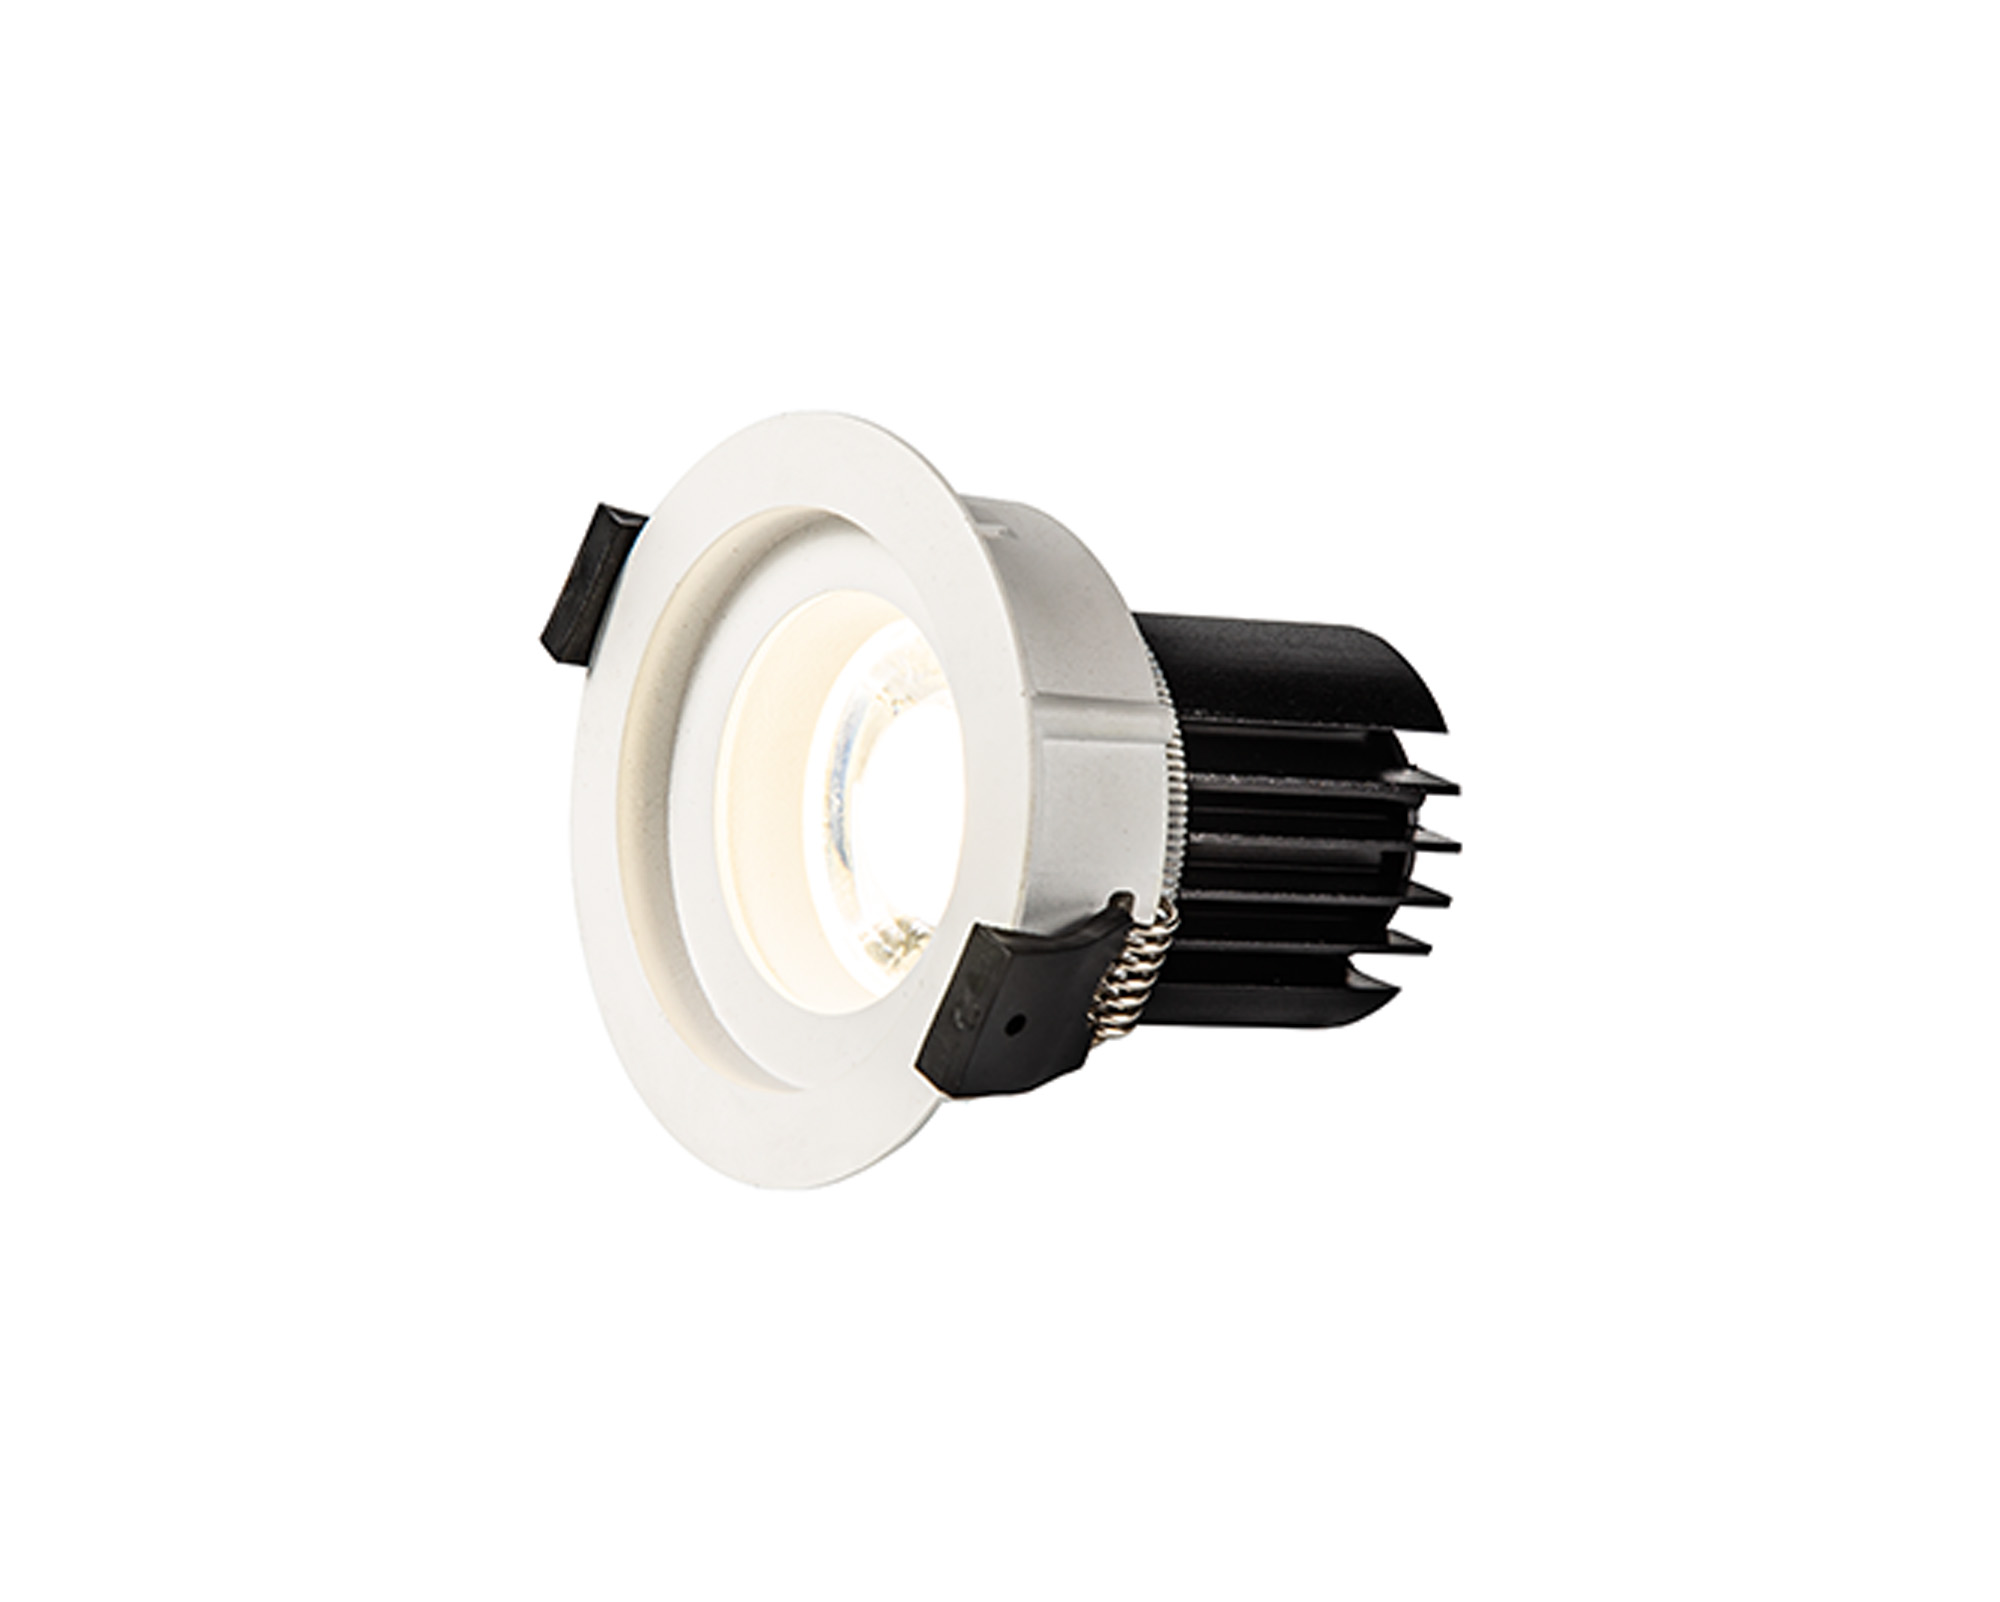 DM202318  Beppe 9 Tridonic Powered 9W 2700K 770lm 24° CRI>90 LED Engine White Stepped Fixed Recessed Spotlight, IP20